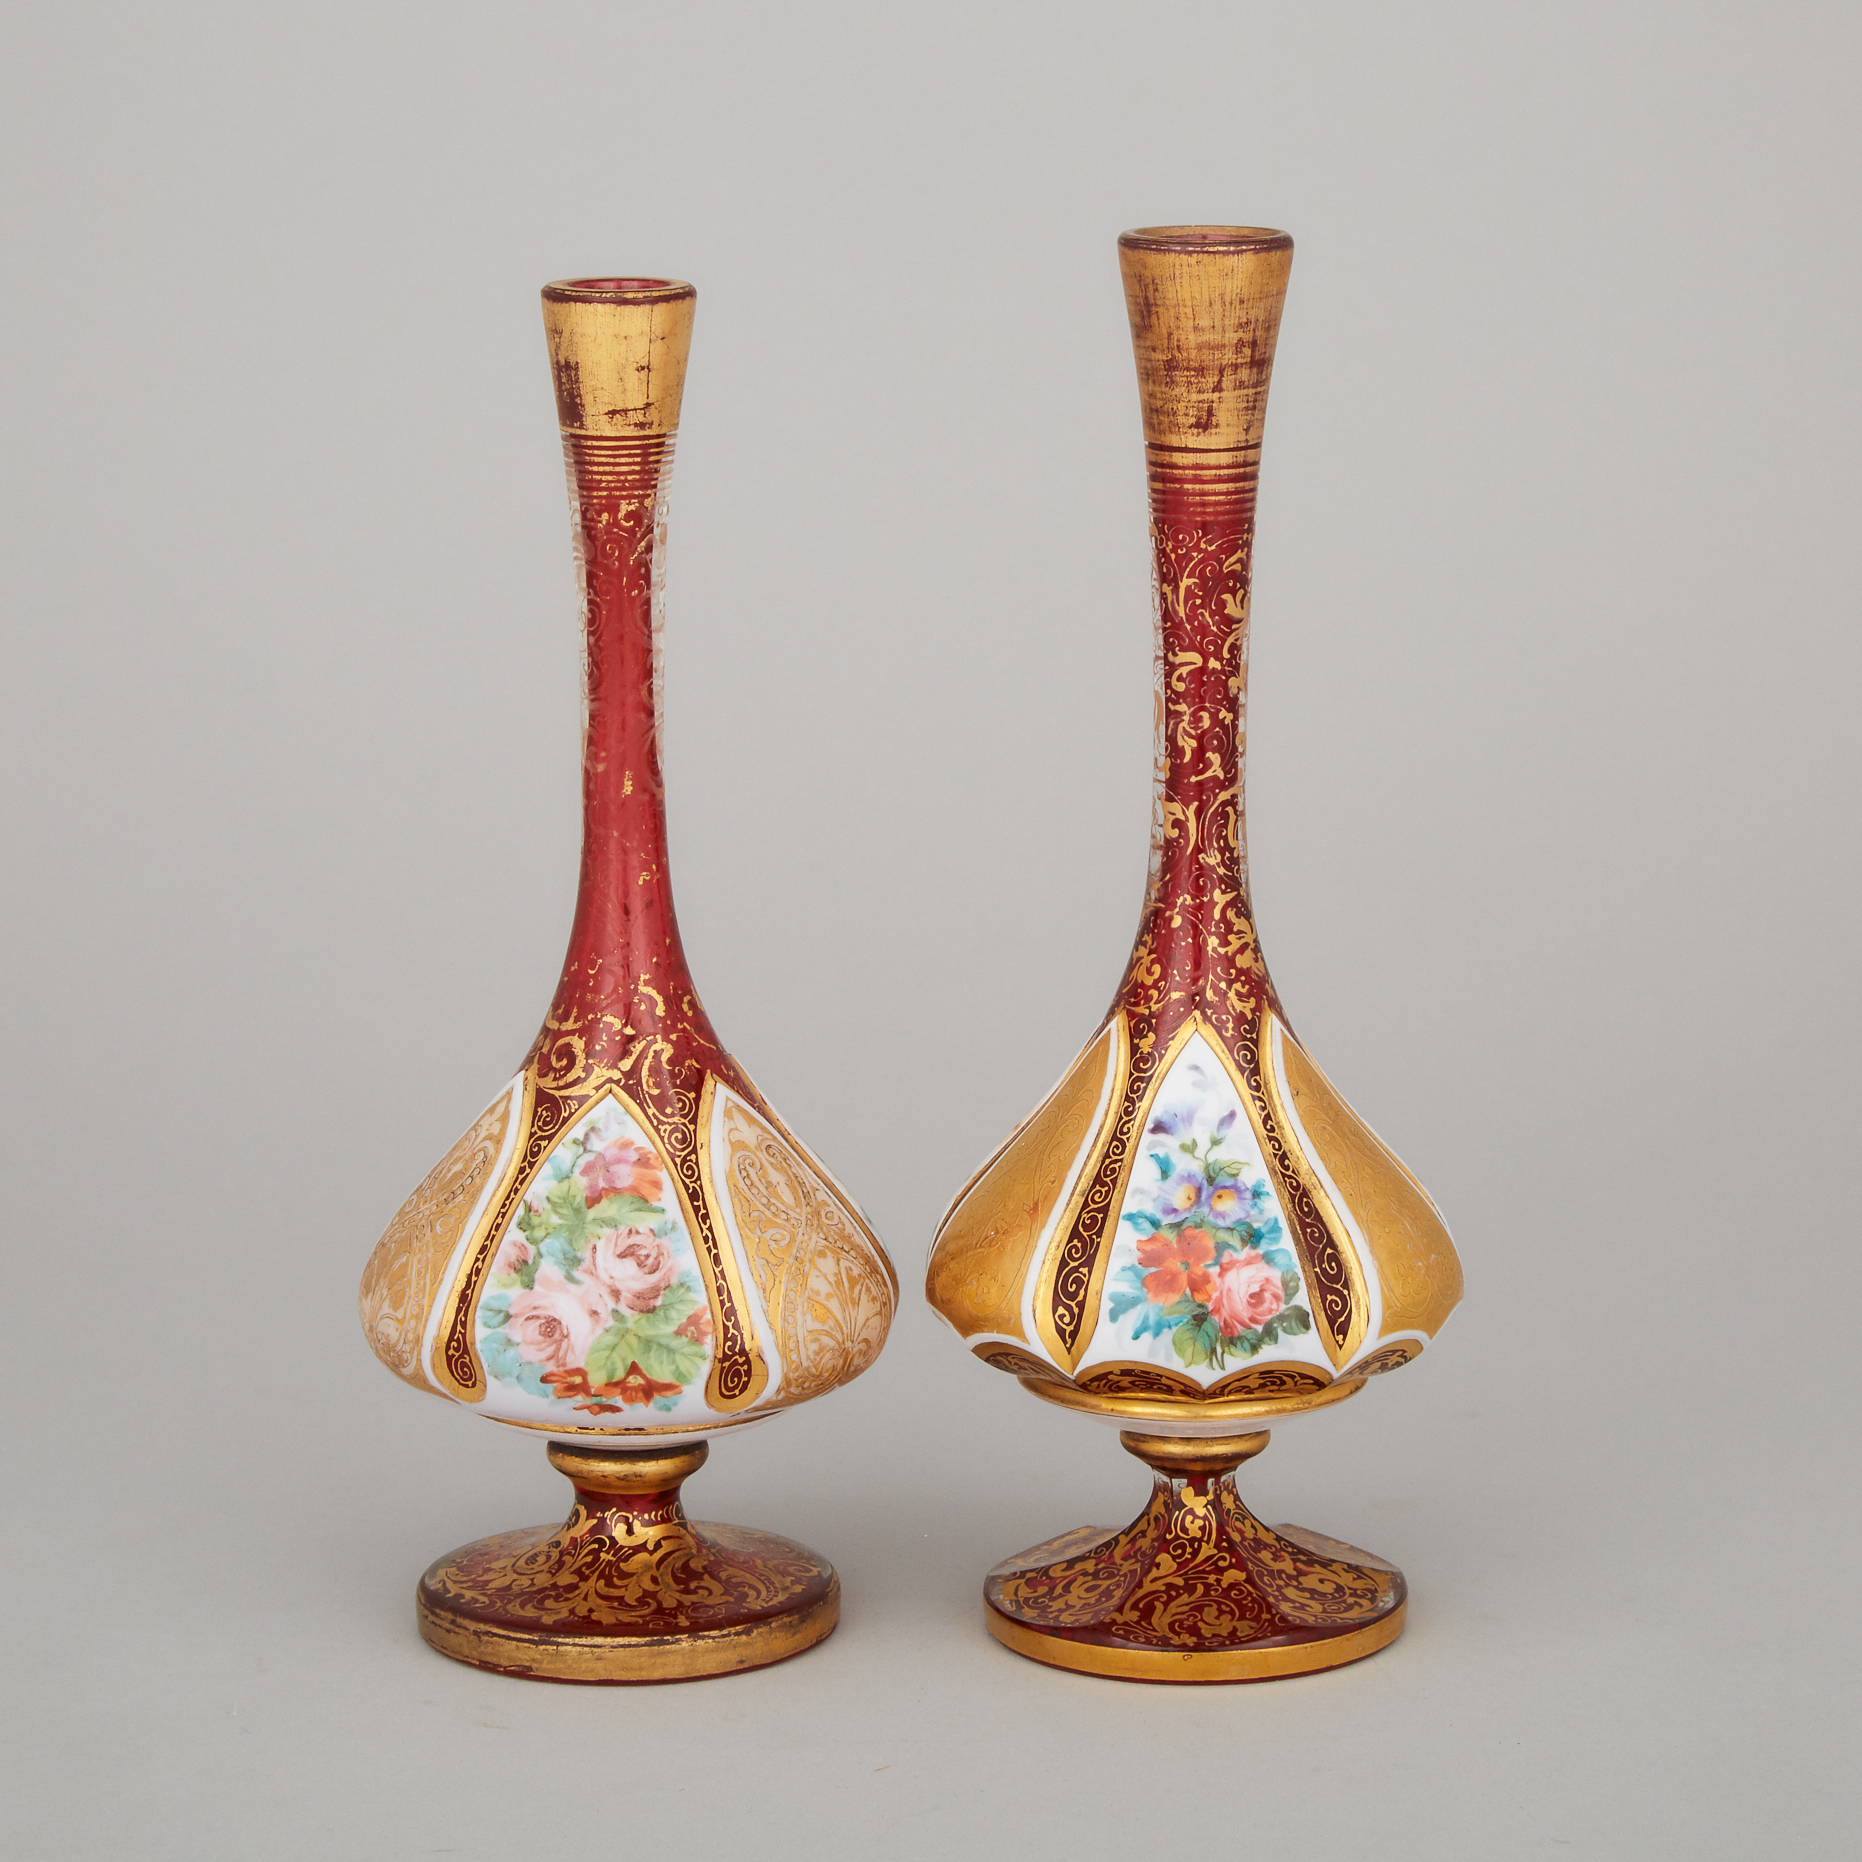 Two Bohemian Overlaid, Enameled, and Gilt Red Glass Vases, late 19th century